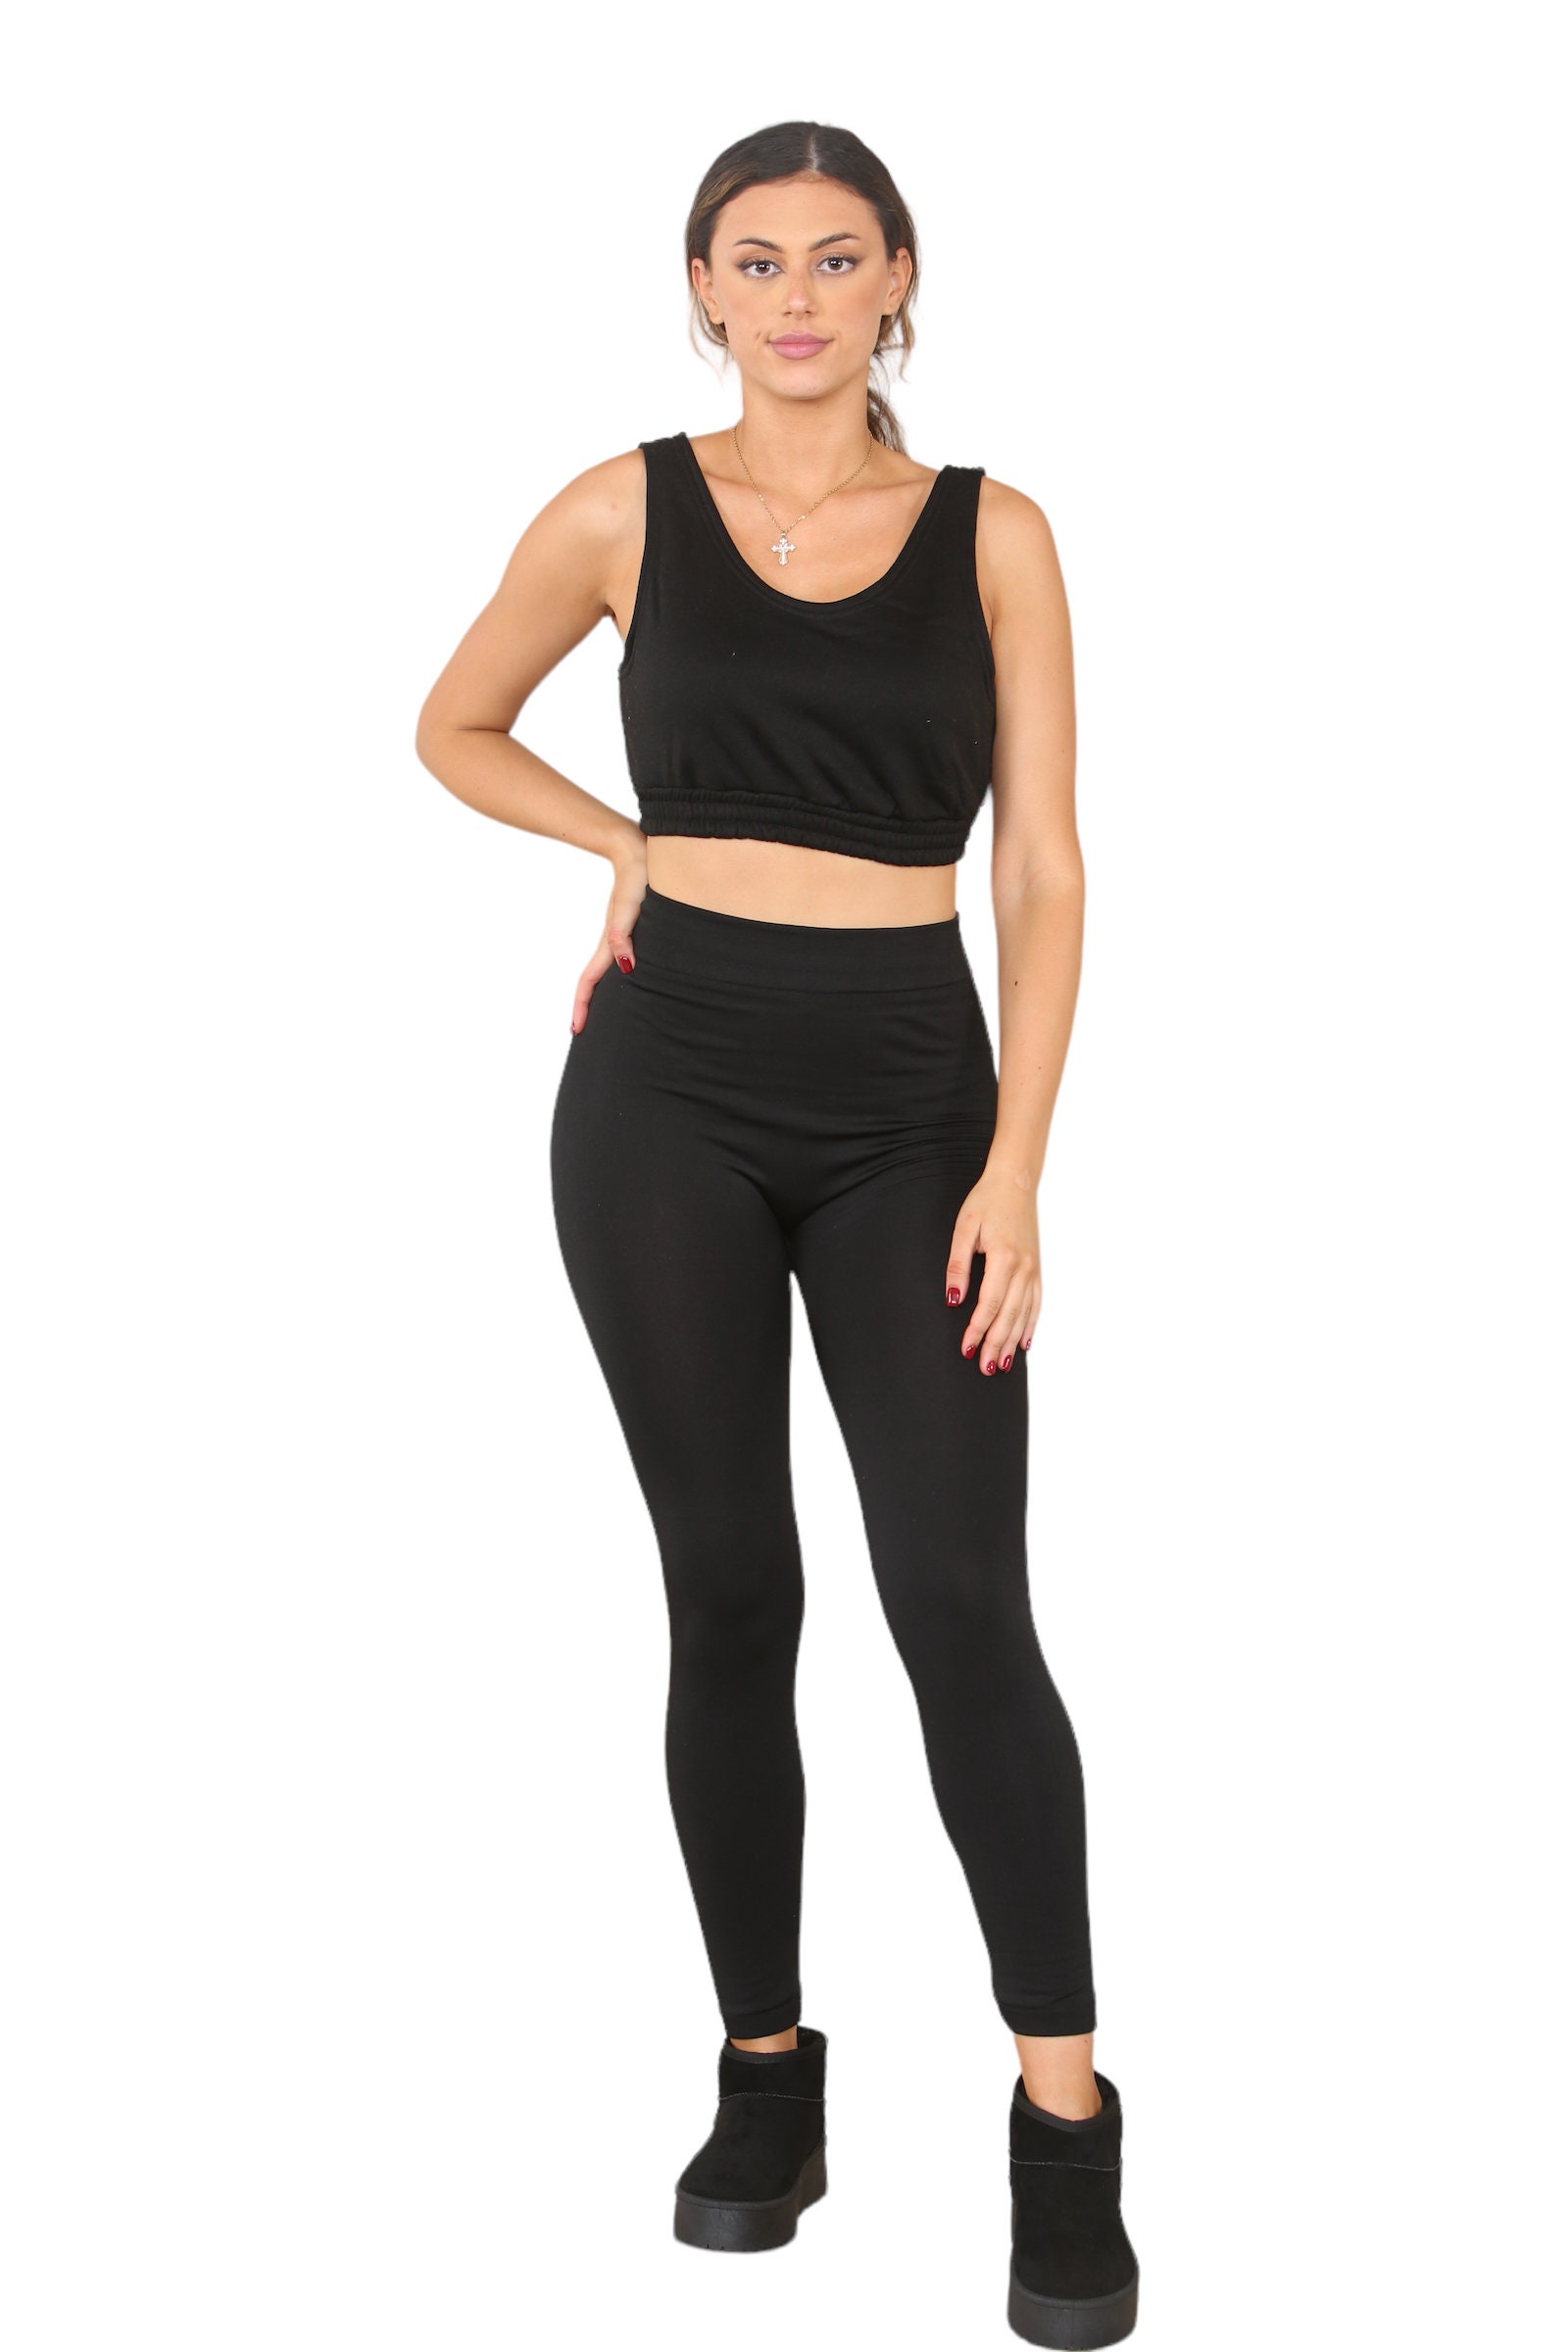 Brown Seamless High-waist Leggings: Elevate Your Sport, Yoga, and